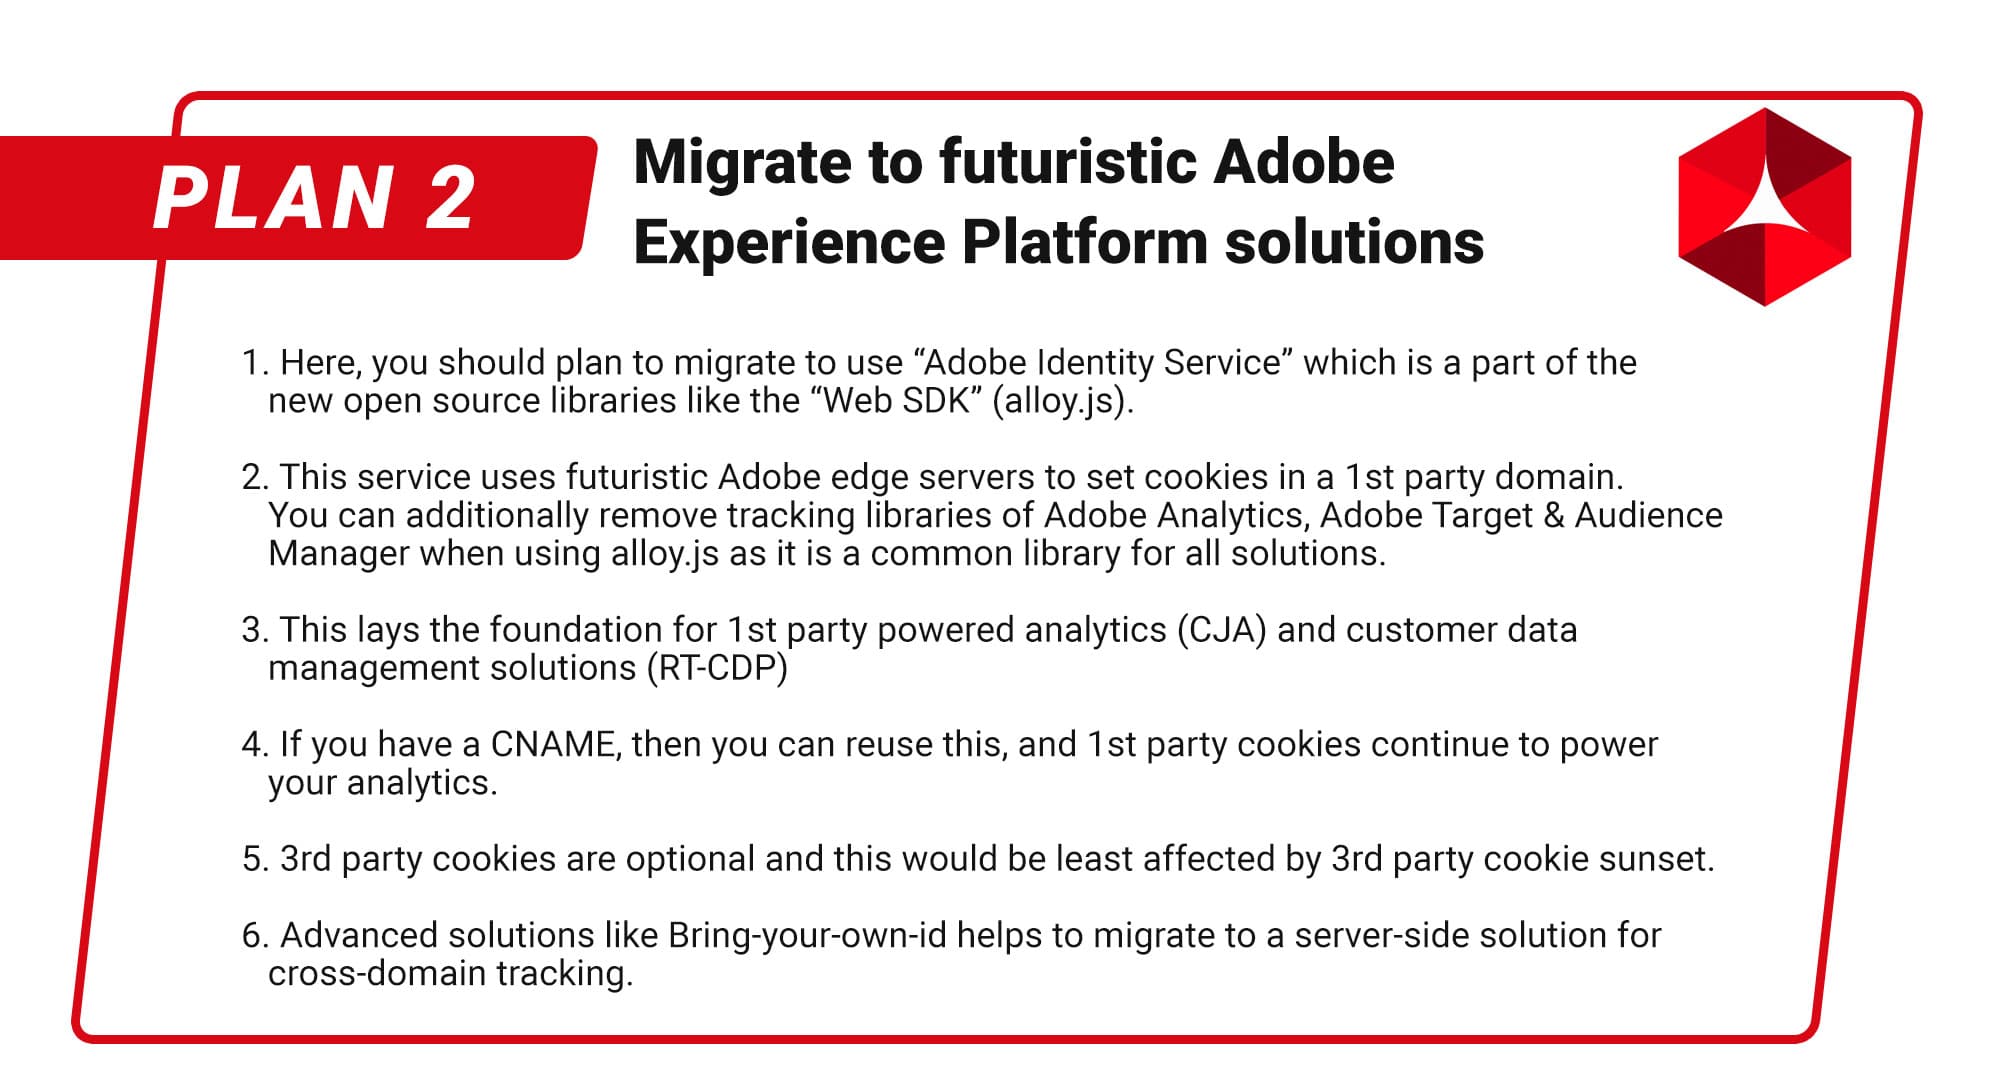 Migrate to Futuristic Adobe Experience Platform Solutions